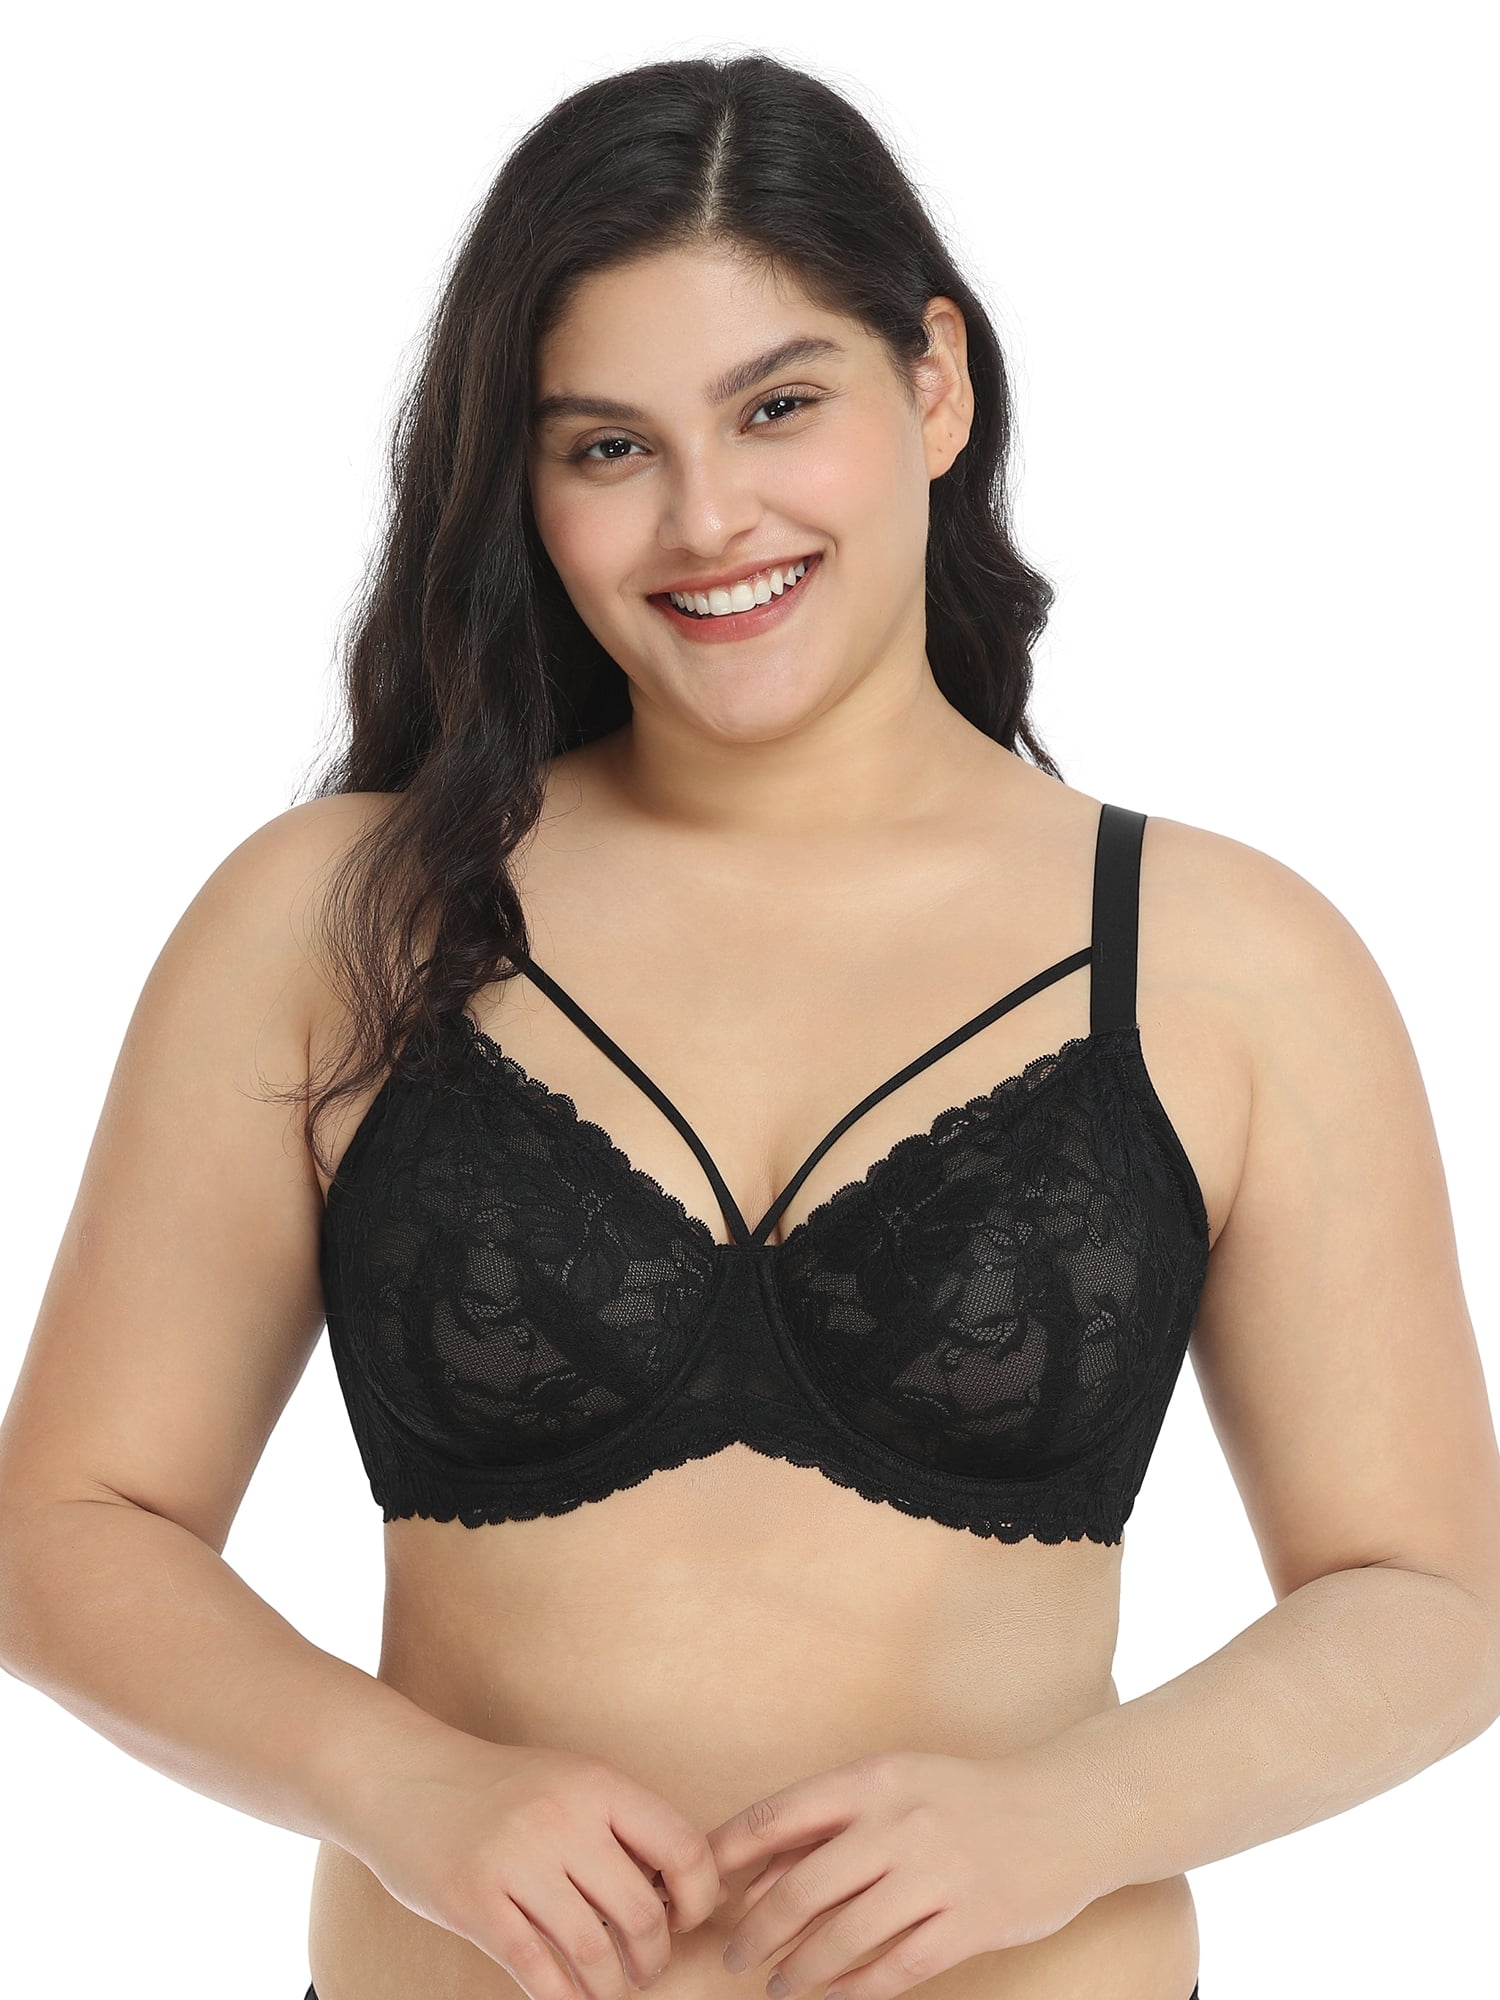 Paramour by Felina  Amaranth Cushioned Comfort Unlined Minimizer Bra  (French Navy, 42G) 